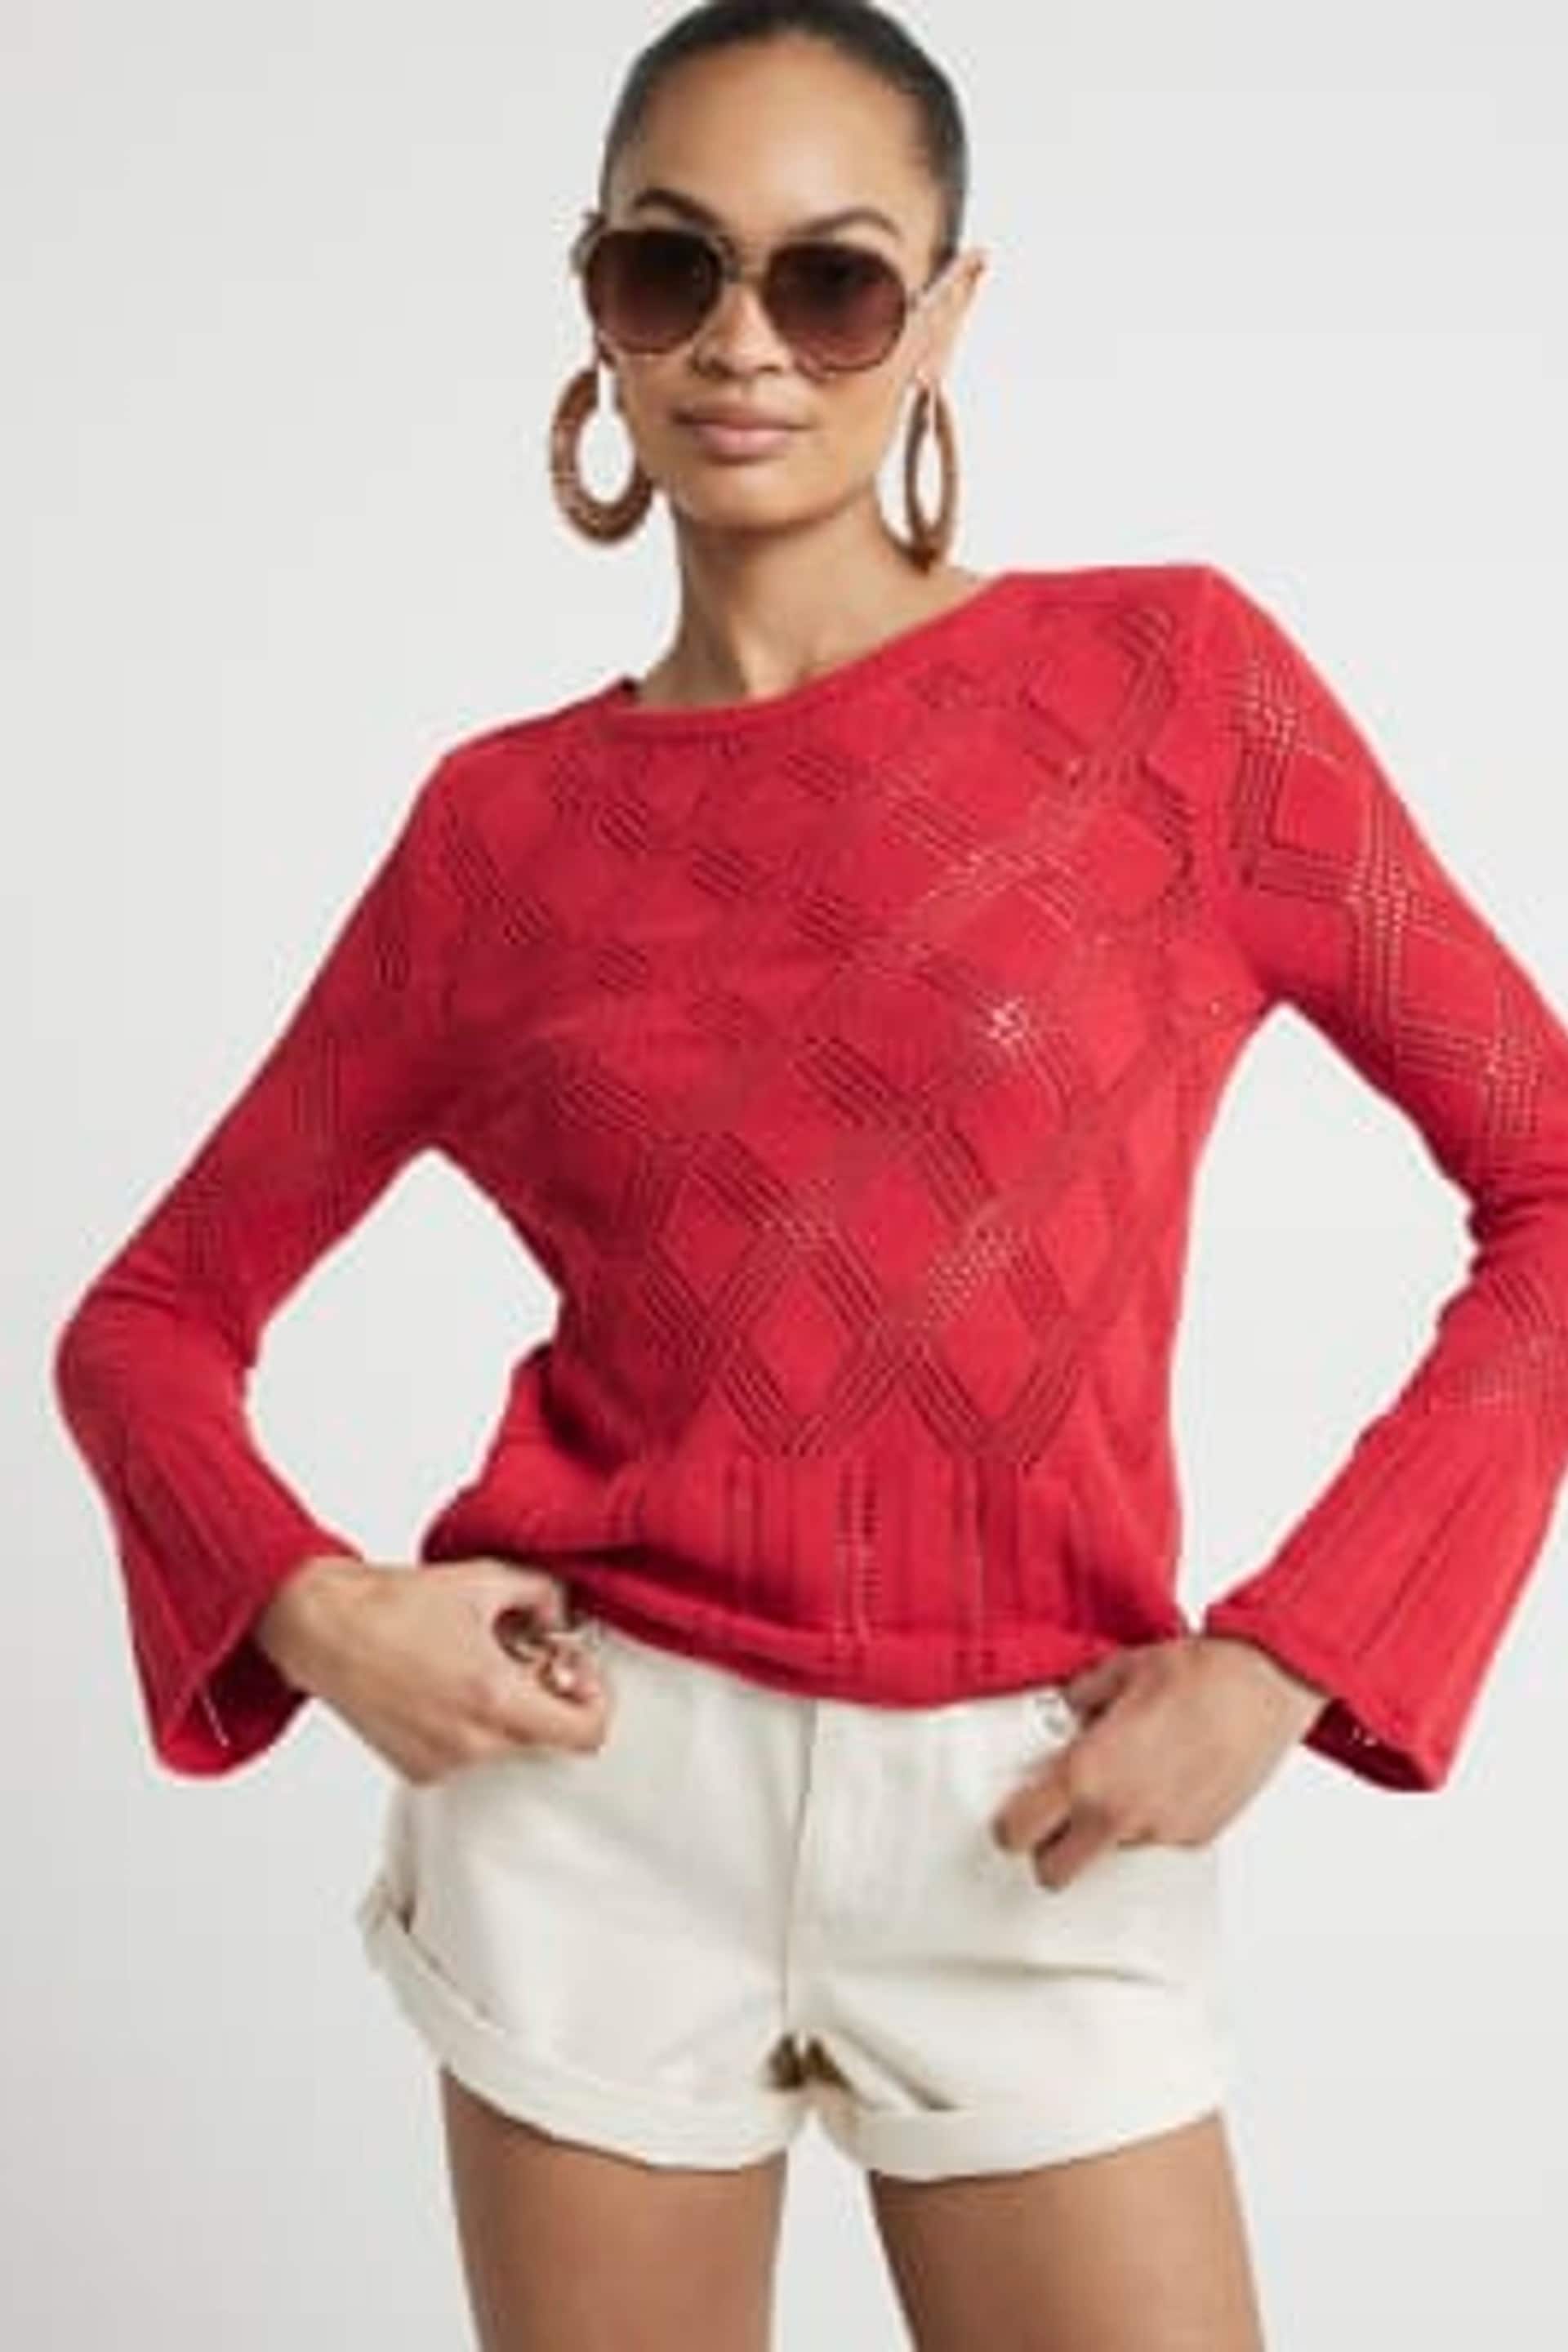 River Island Red Crochet Tie Back Top - Image 1 of 6